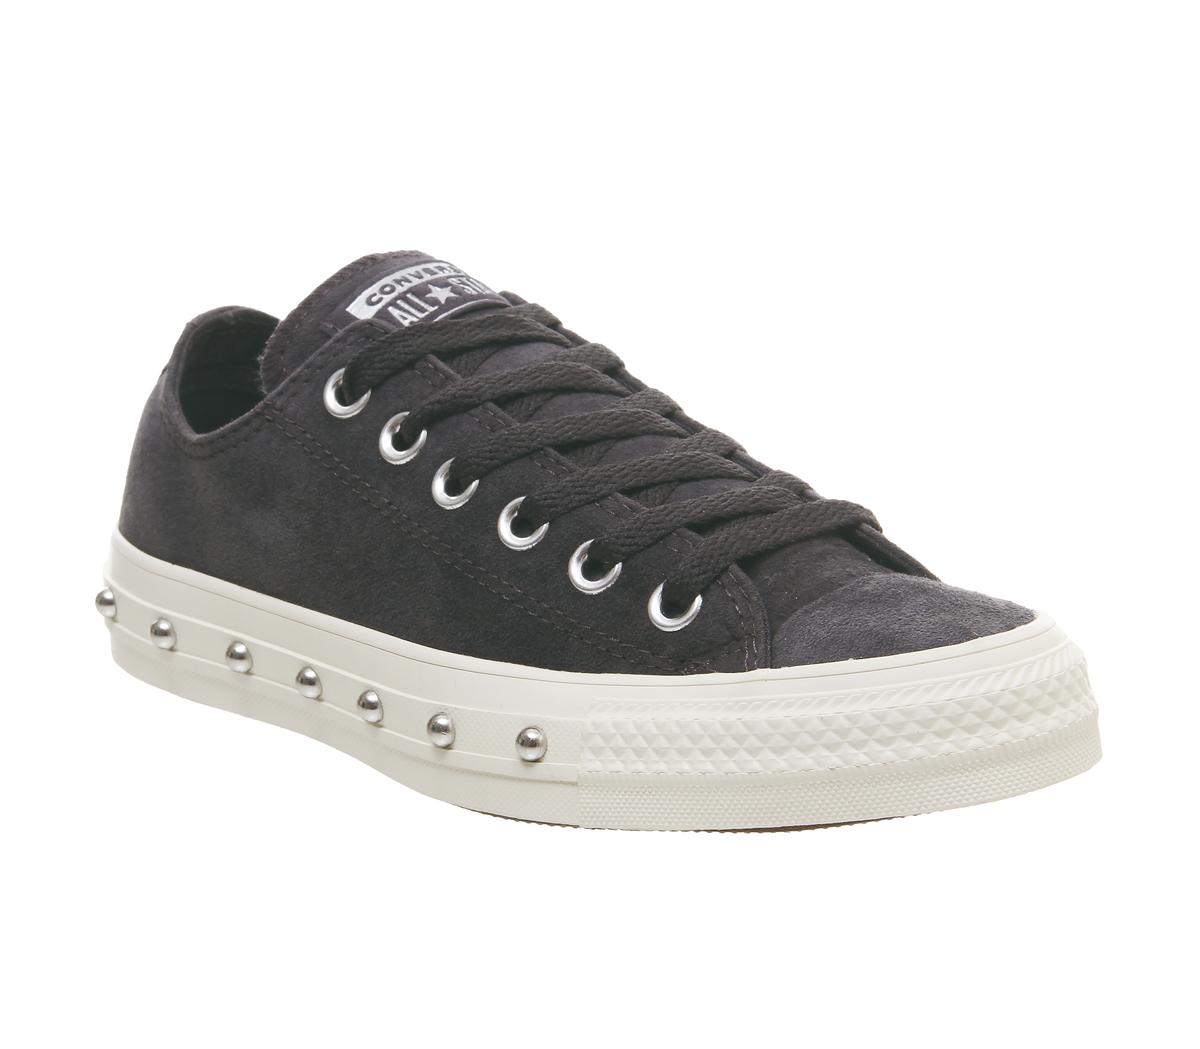 ConverseConverse All Star Low TrainersAlmost Black White Stud Exclusive